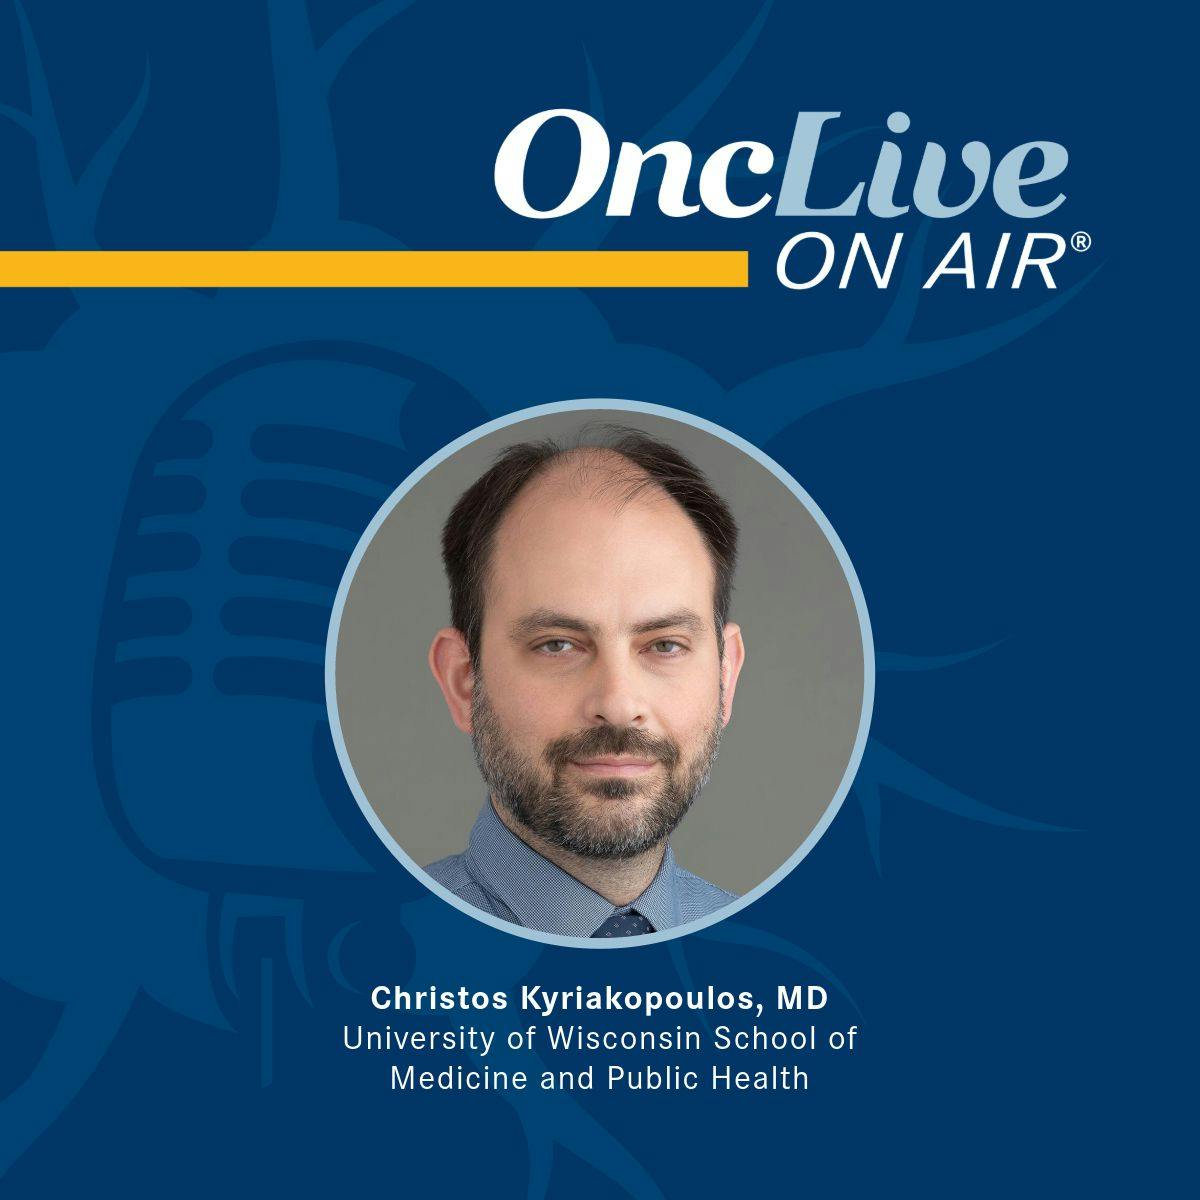 Christos Kyriakopoulos, MD, medical oncologist, associate professor, the Department of Medicine, Division of Hematology, Medical Oncology and Palliative Care, the University of Wisconsin School of Medicine and Public Health